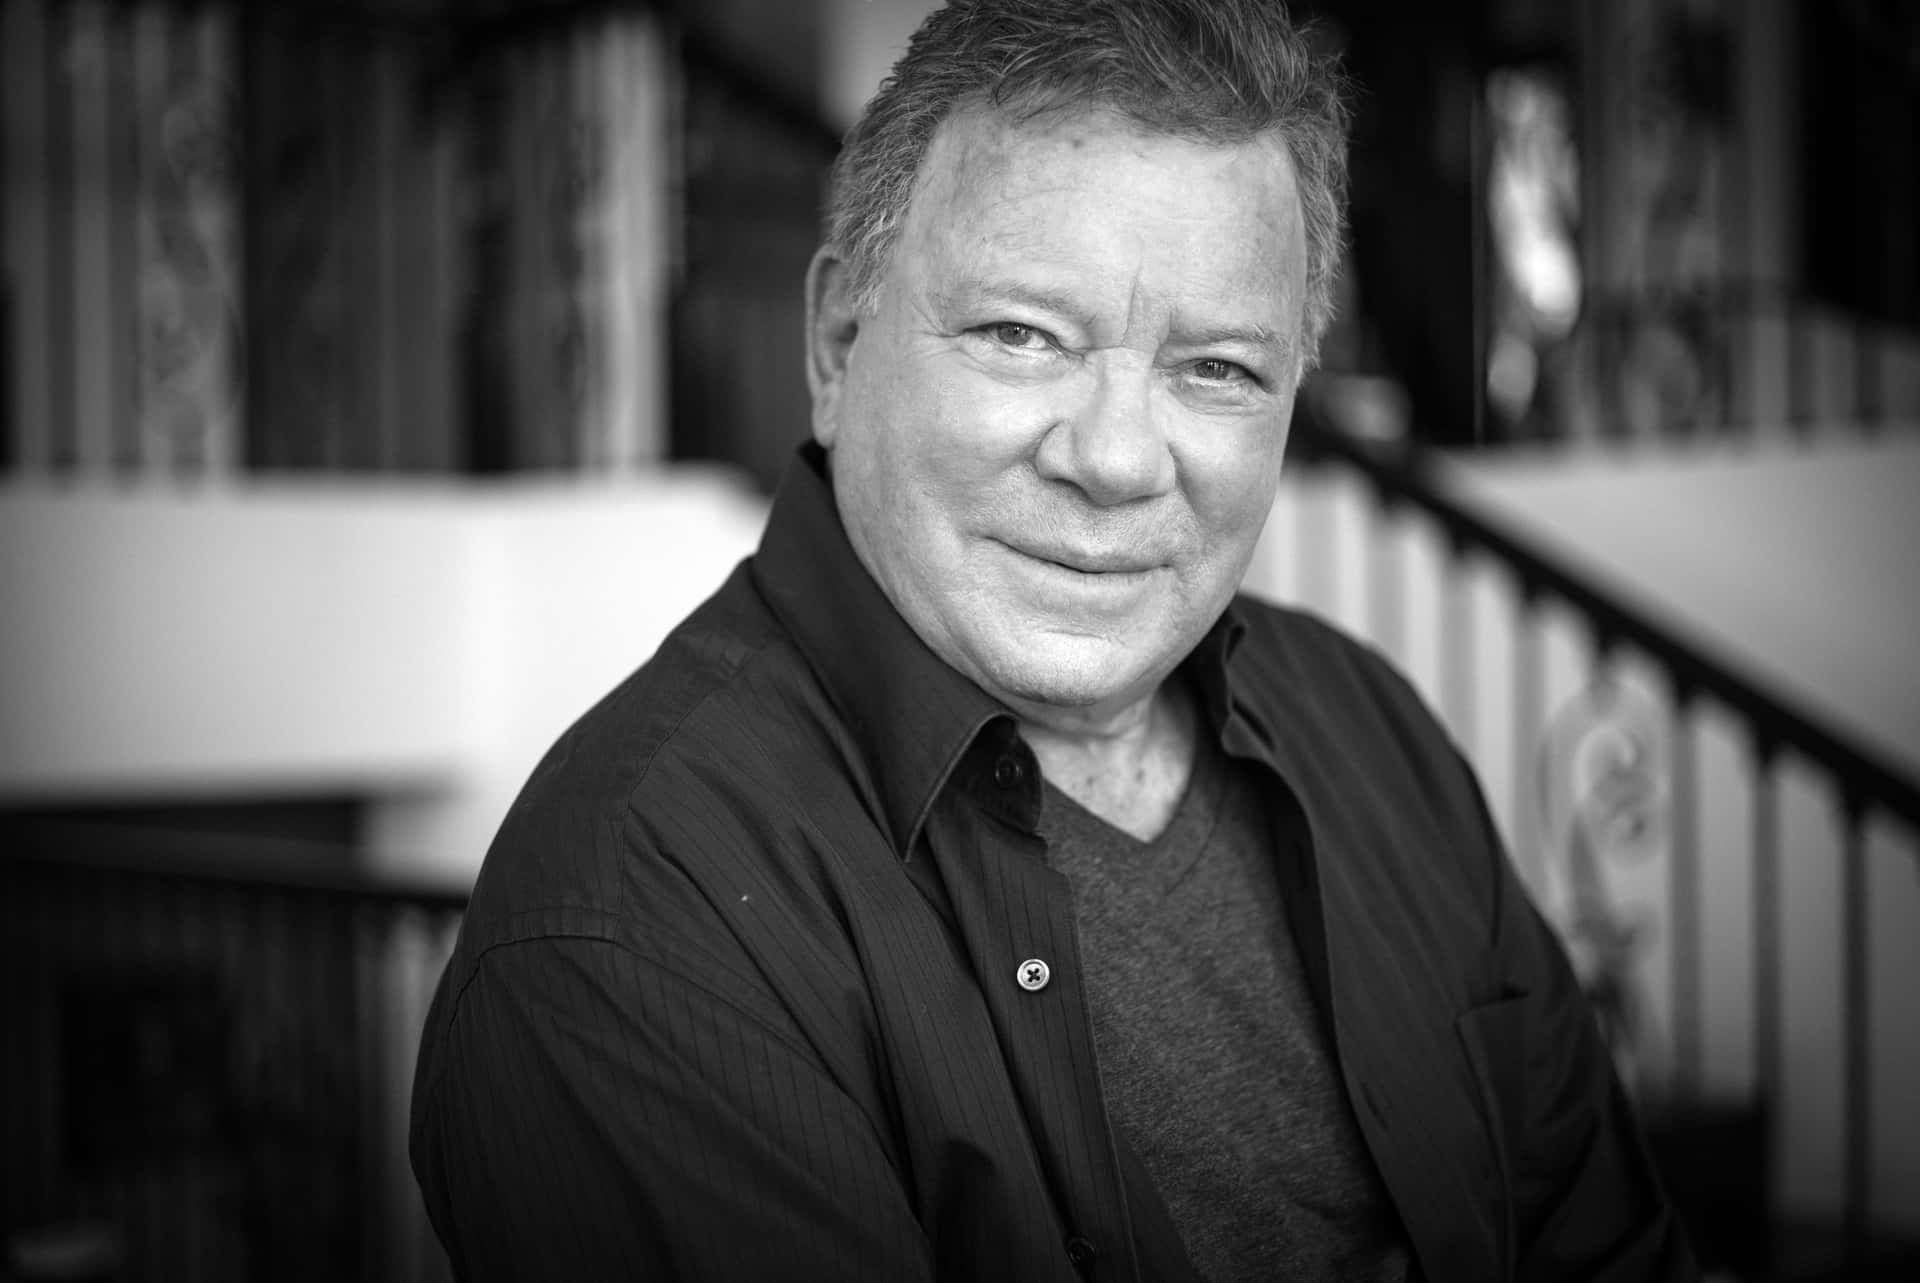 Legendary Hollywood actor, William Shatner posing for a professional portrait session. Wallpaper